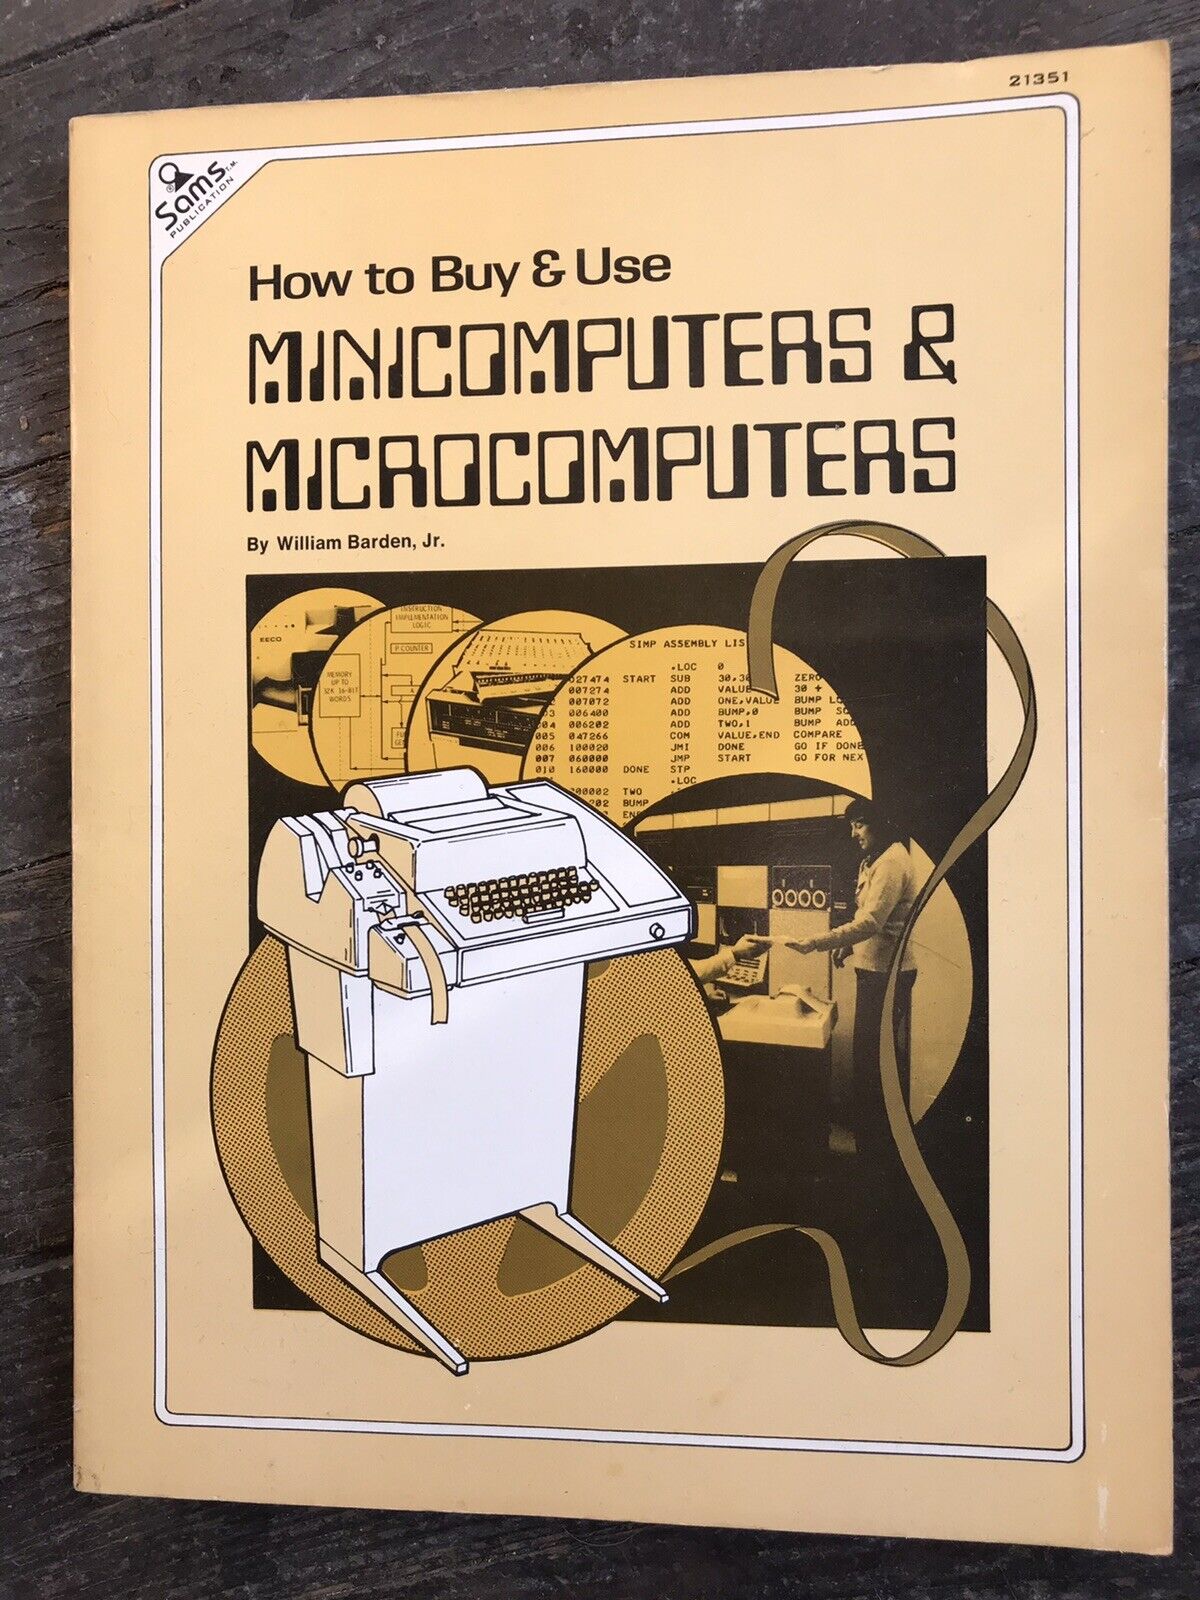 Sams How to Buy & Use Minicomputers & Microcomputers by W. Barden Jr 1st Edition